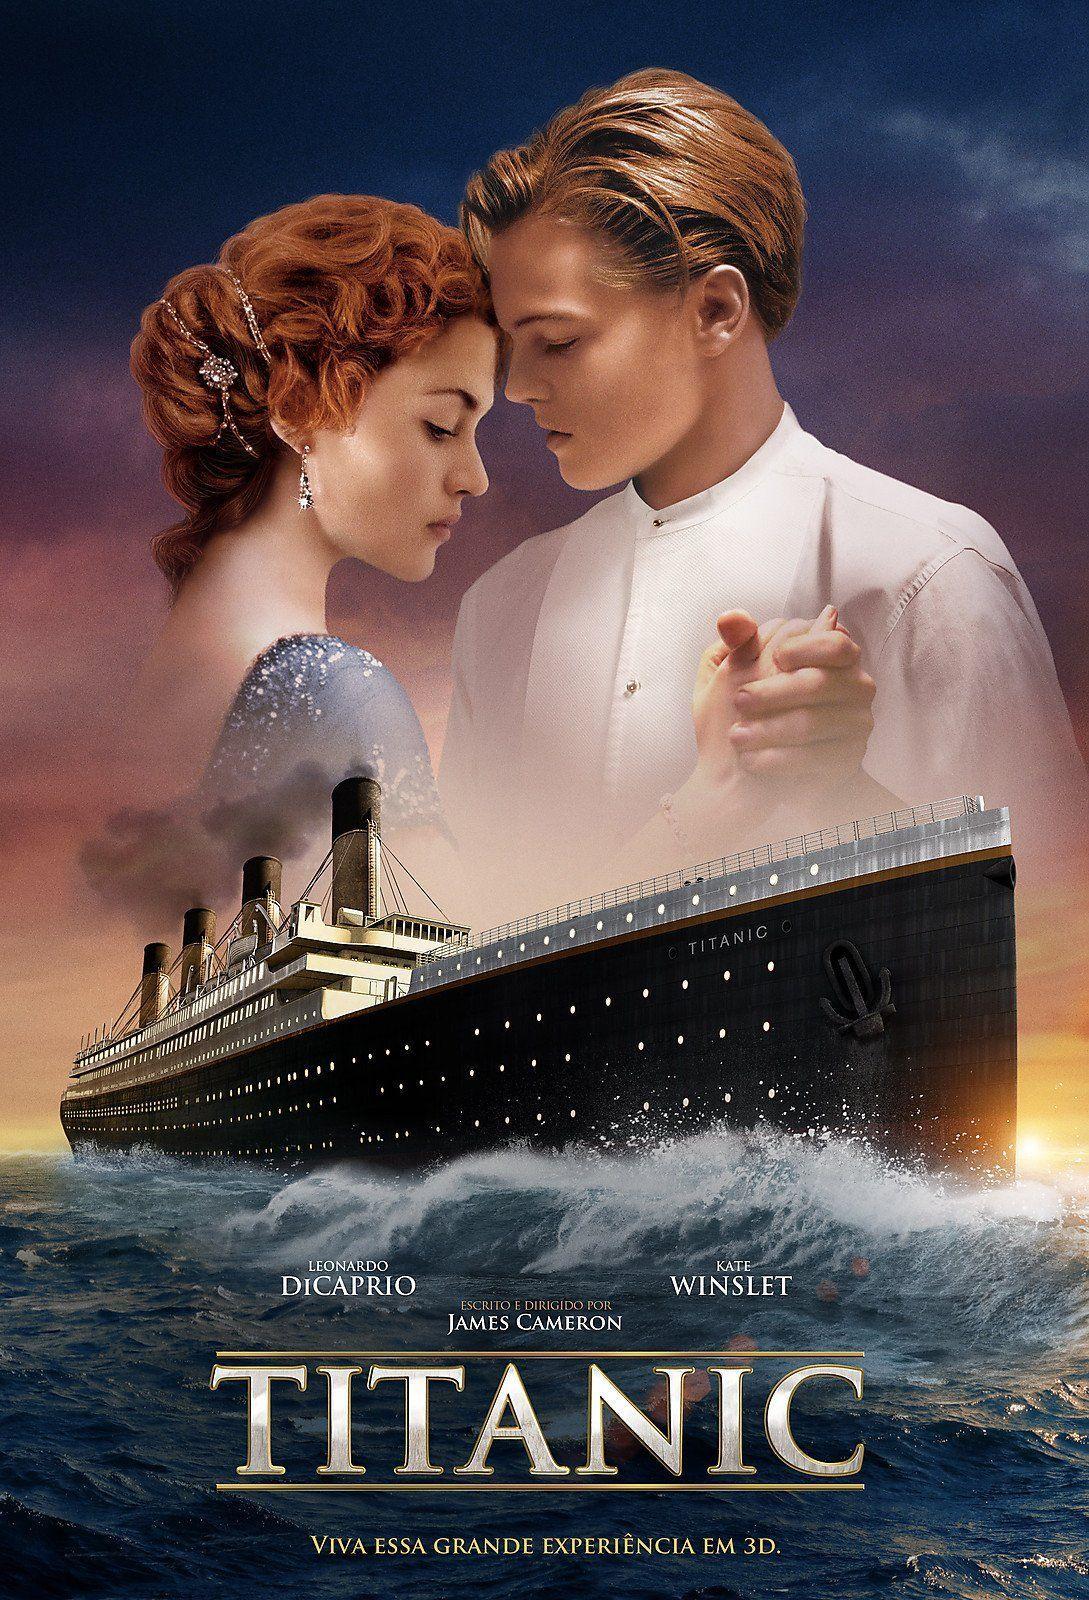 Titanic (1997) HD Wallpaper From Gallsource.com. posters